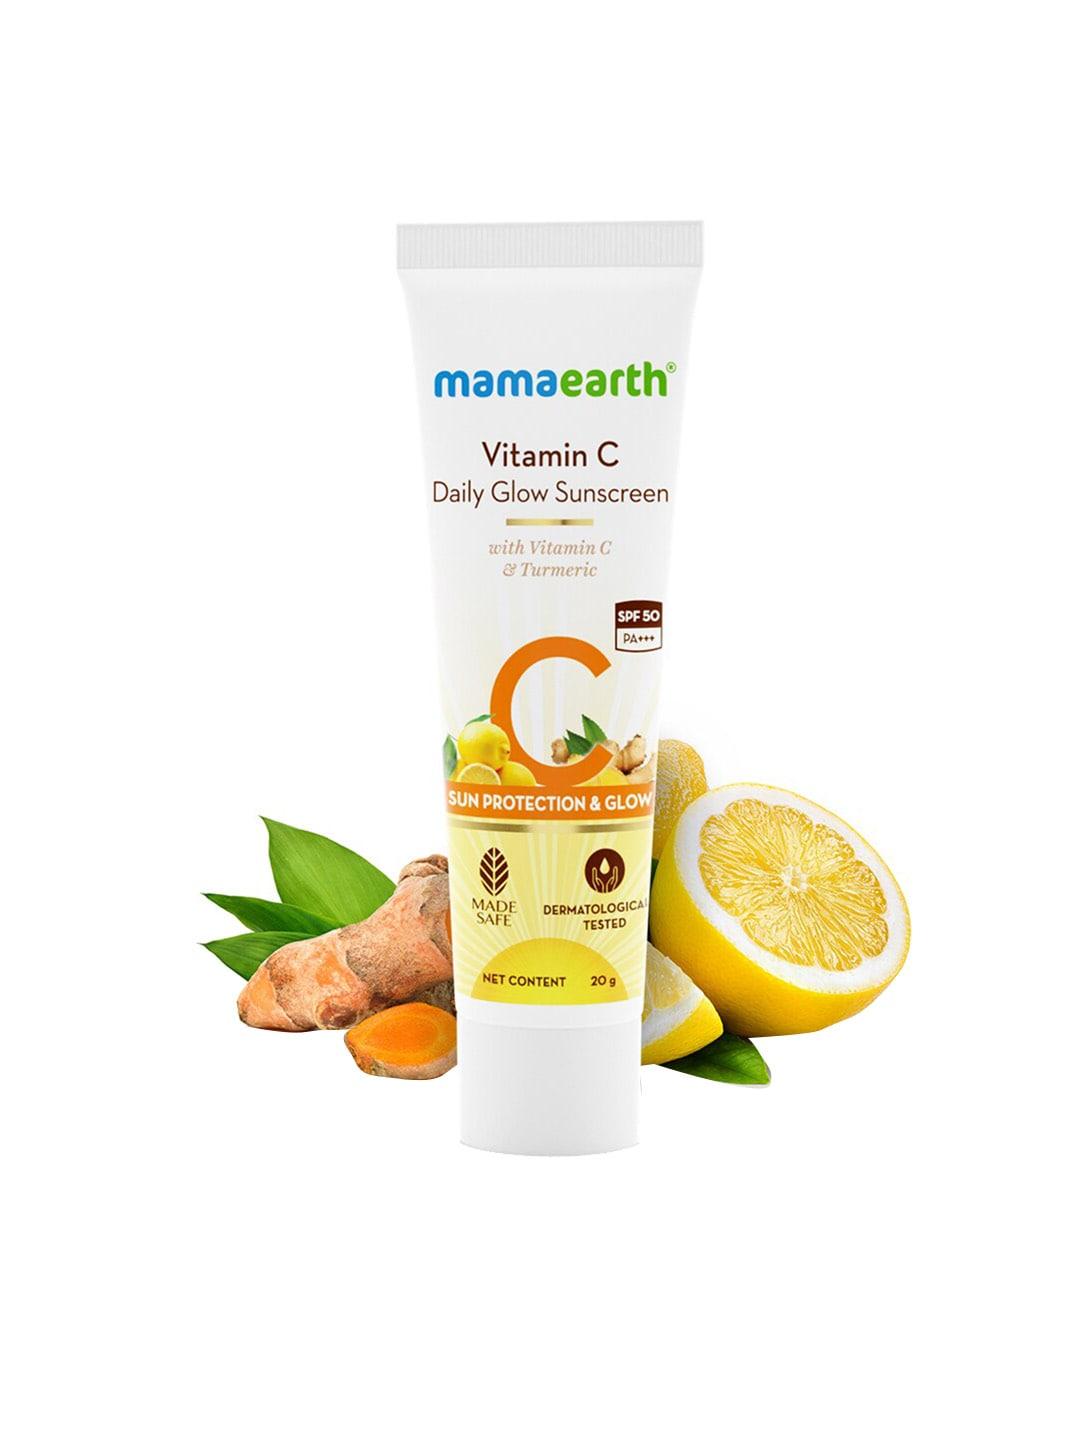 Mamaearth Vitamin C Daily Glow SPF50 Sunscreen with Turmeric for Sun Protection - 20g